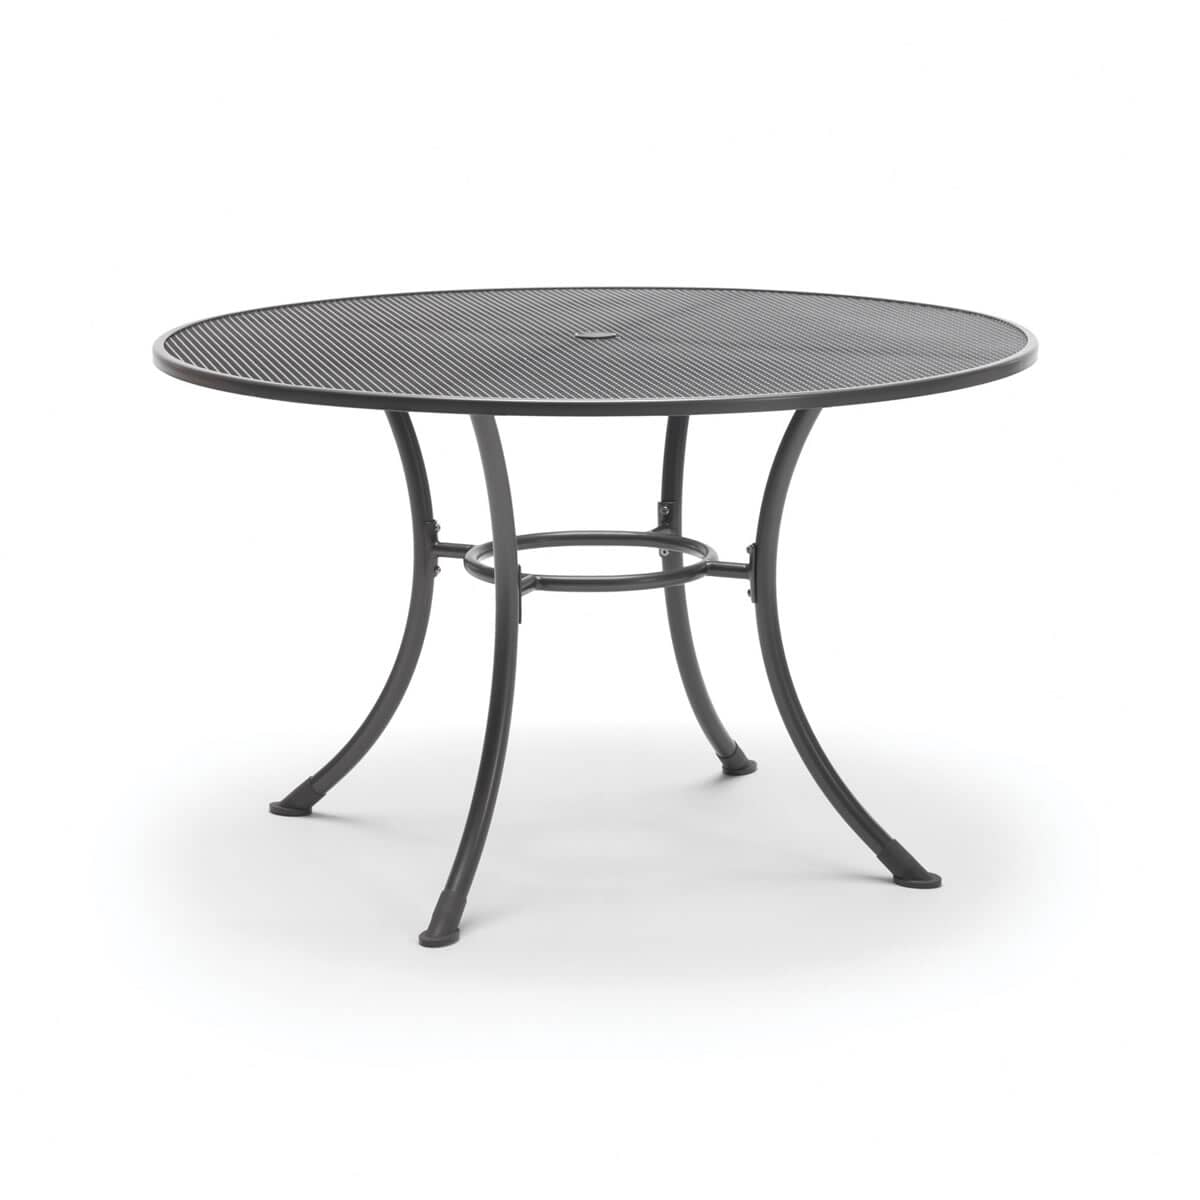 Kettler Round Mesh Top Table 135cm - IRON GREY - With Parasol Hole